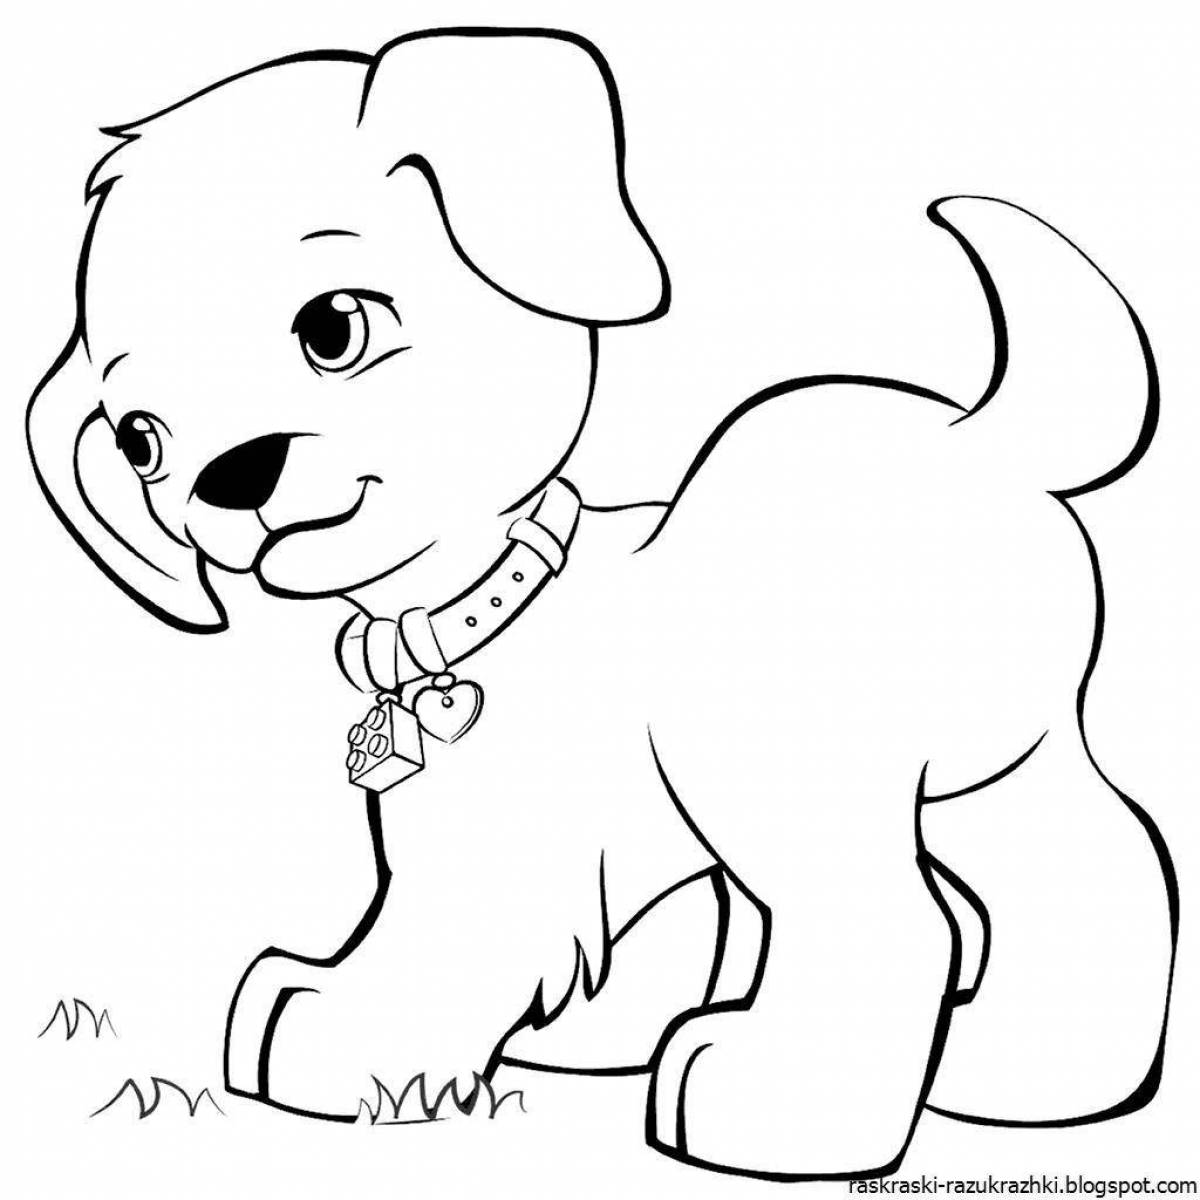 Fluffy dog ​​coloring book for kids